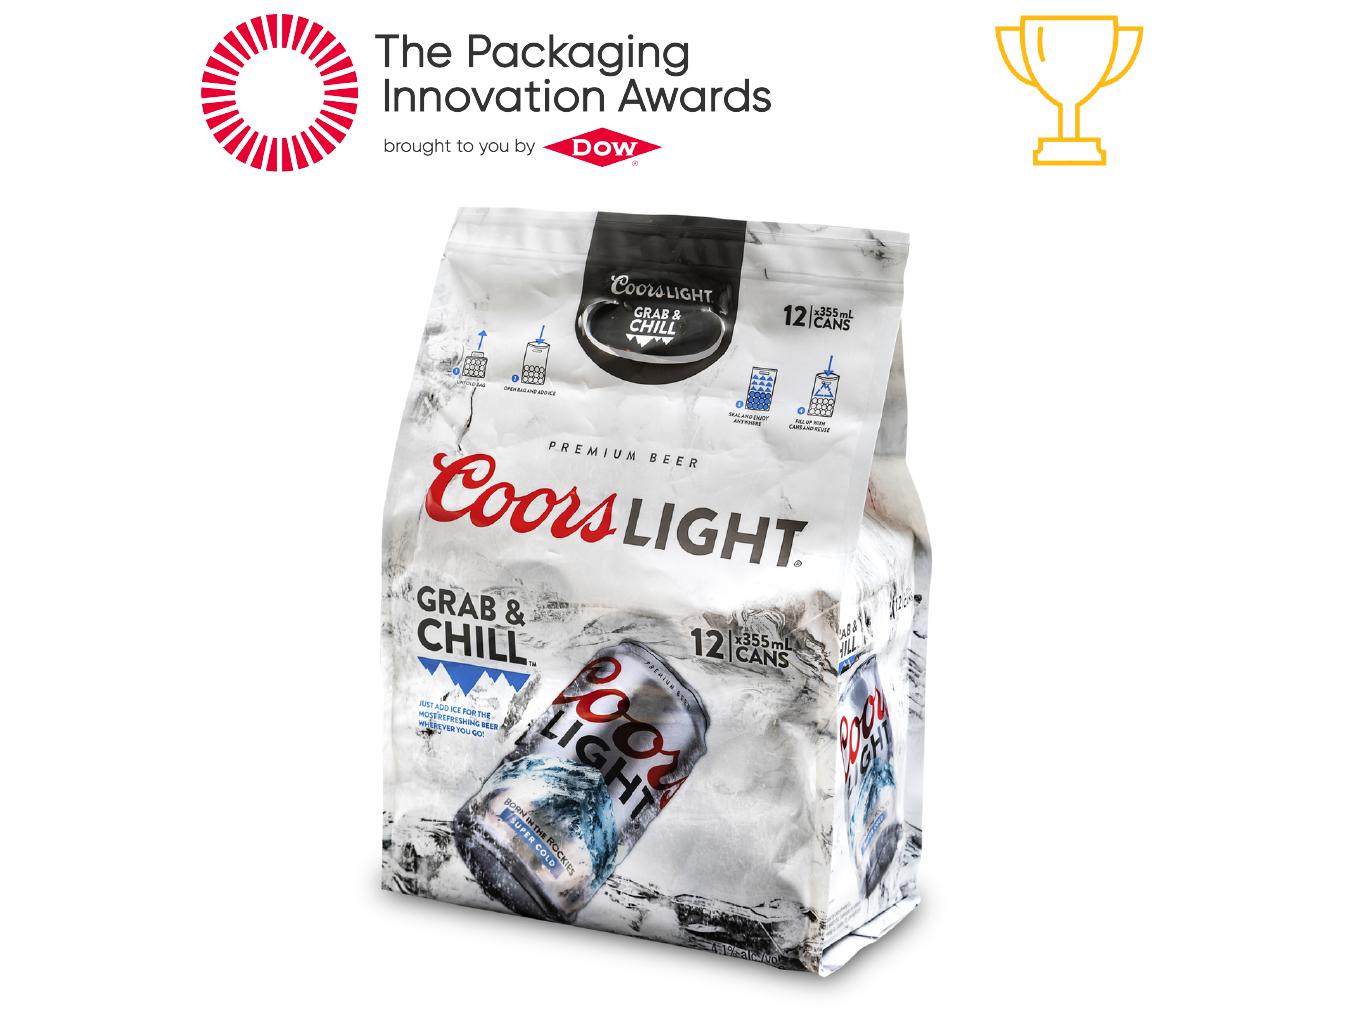 Amcor and Gualapack won a silver award with Danoninho Ice at the 2022  Packaging Innovation Awards by DOW